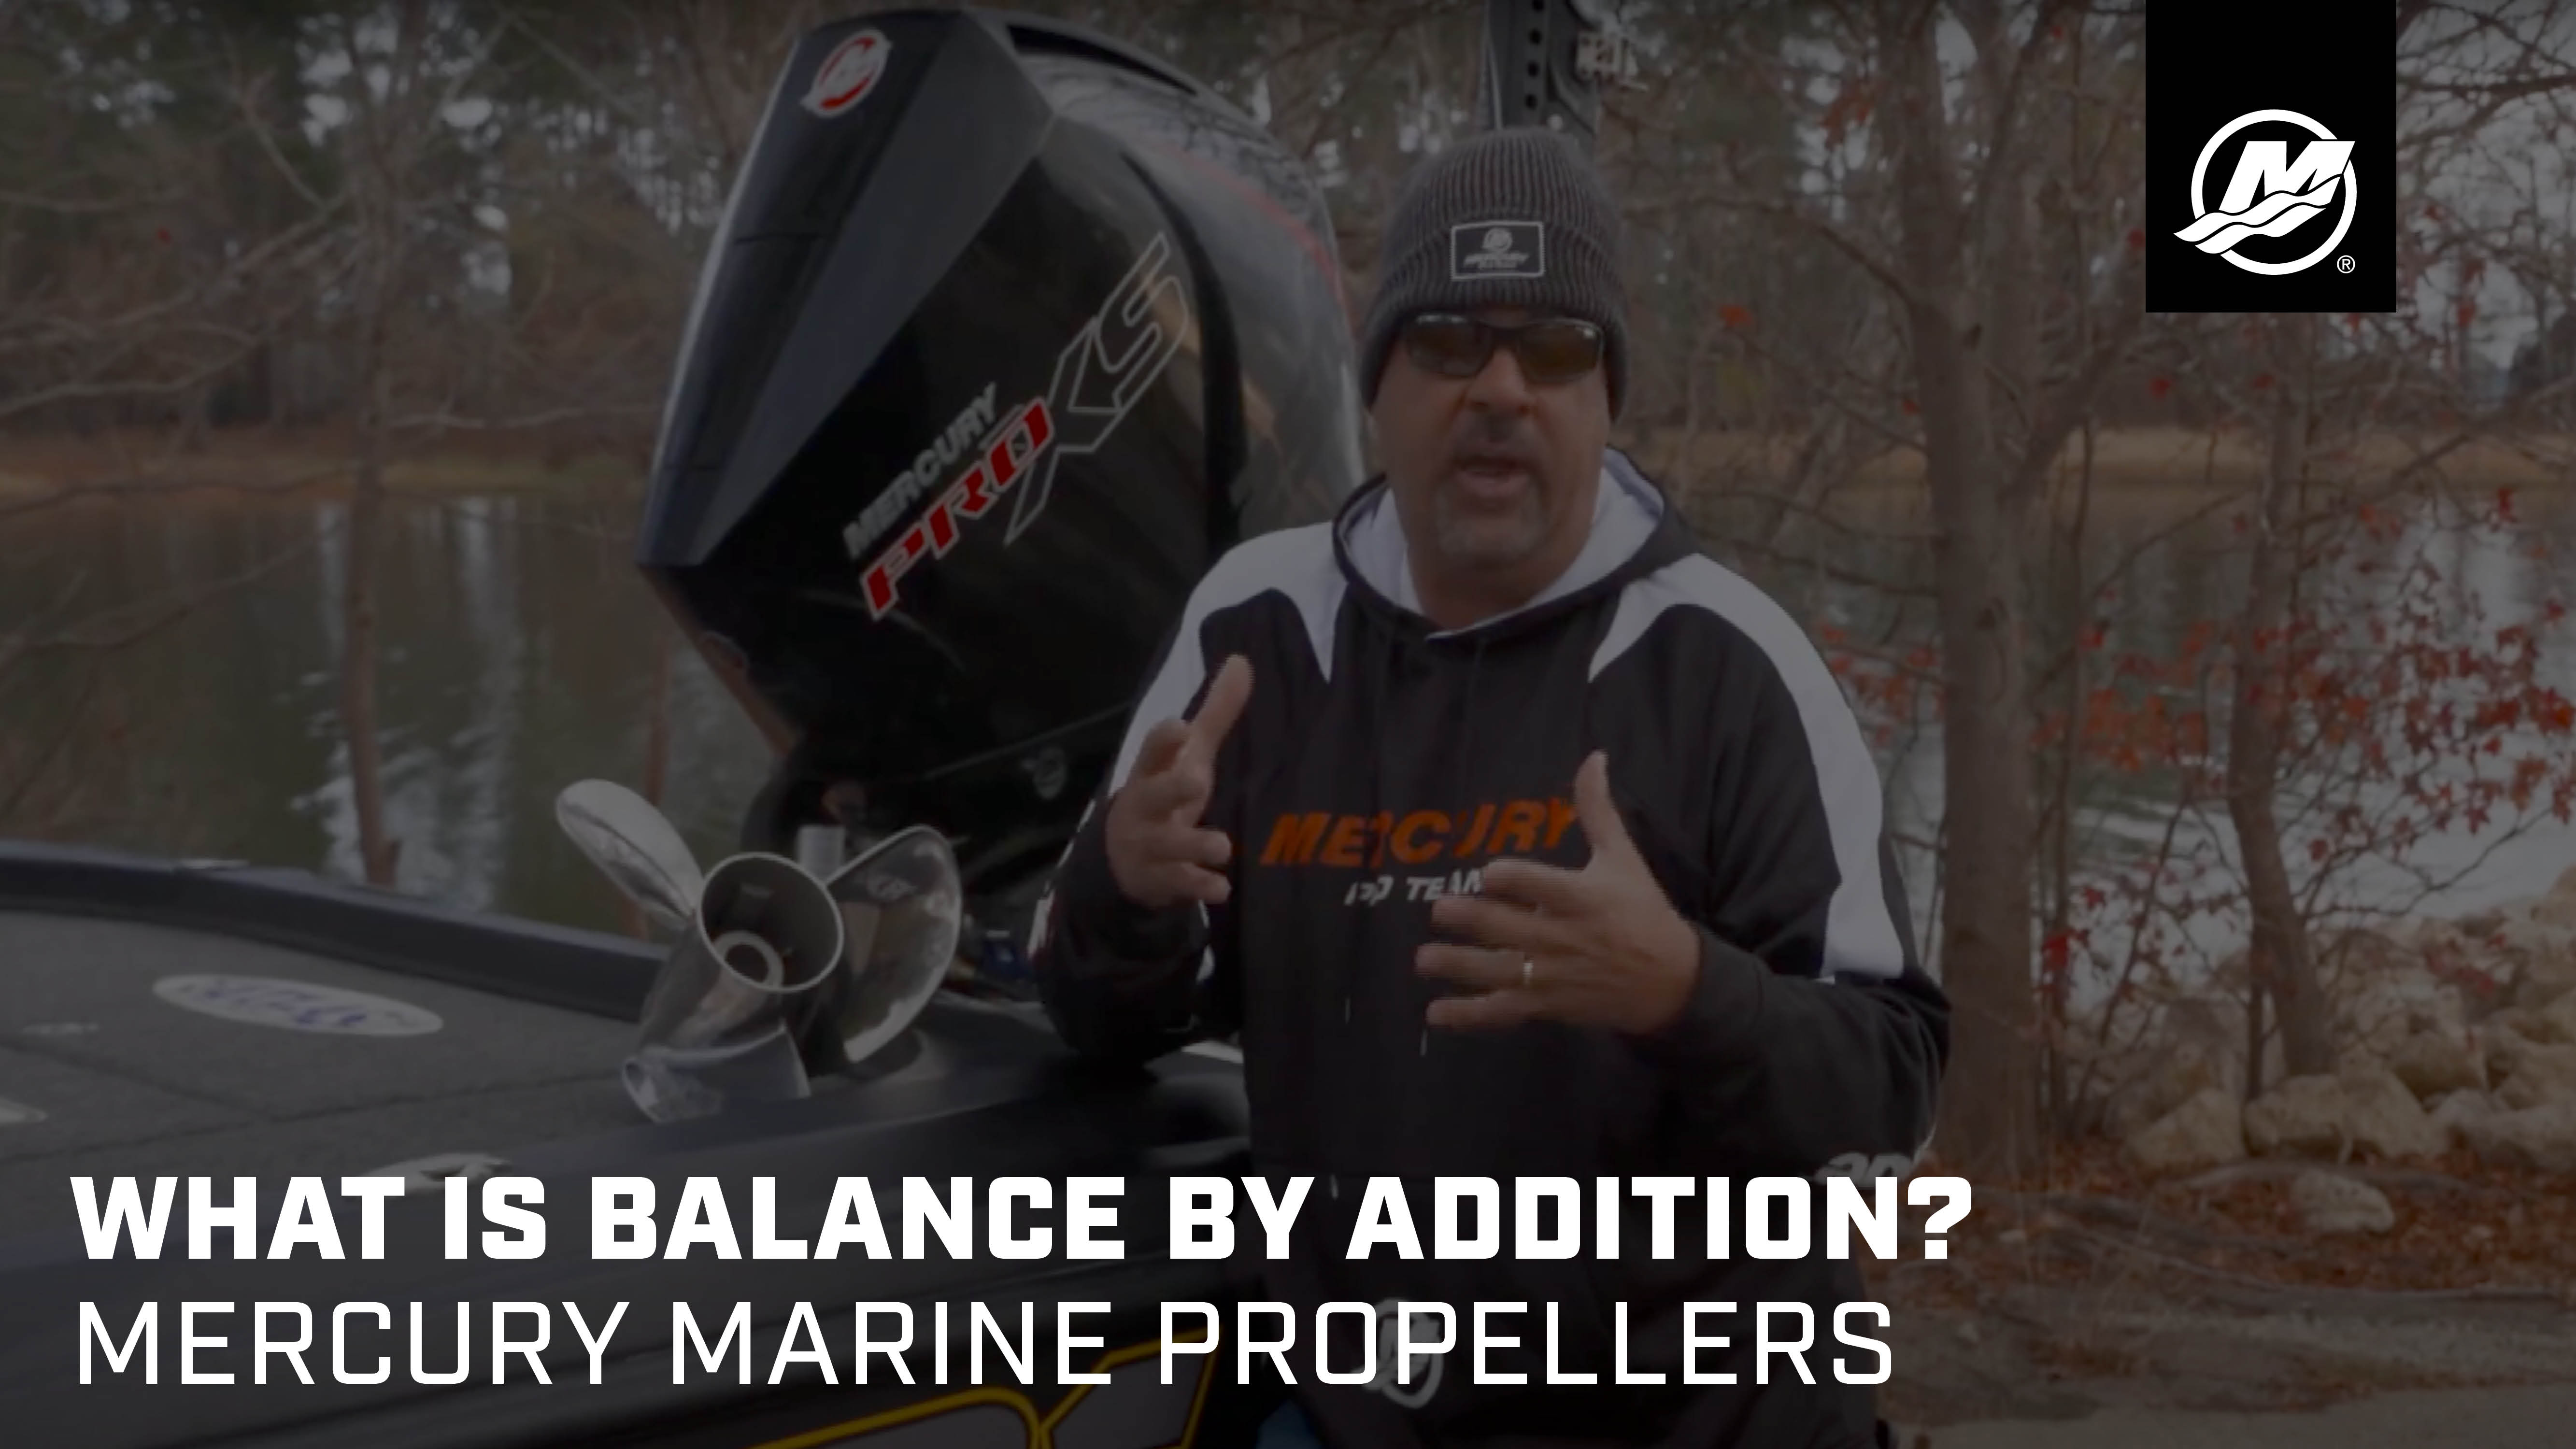 Prop Bite: Balance-By-Addition to Achieve Perfection